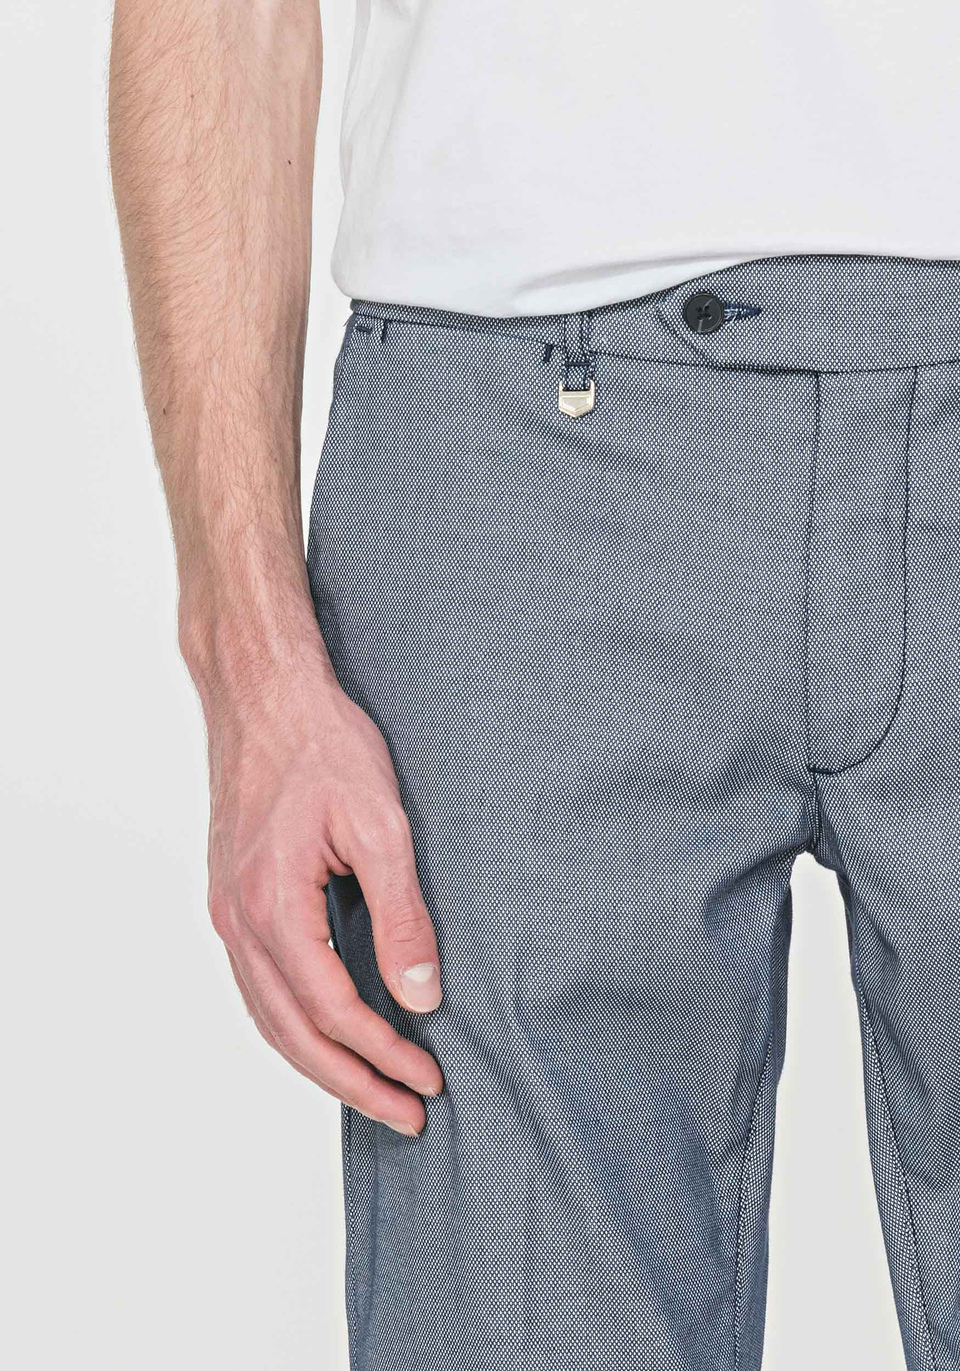 SKINNY-FIT “BRYAN” TROUSERS IN A STRETCHY LIGHTWEIGHT FABRIC - Antony Morato Online Shop